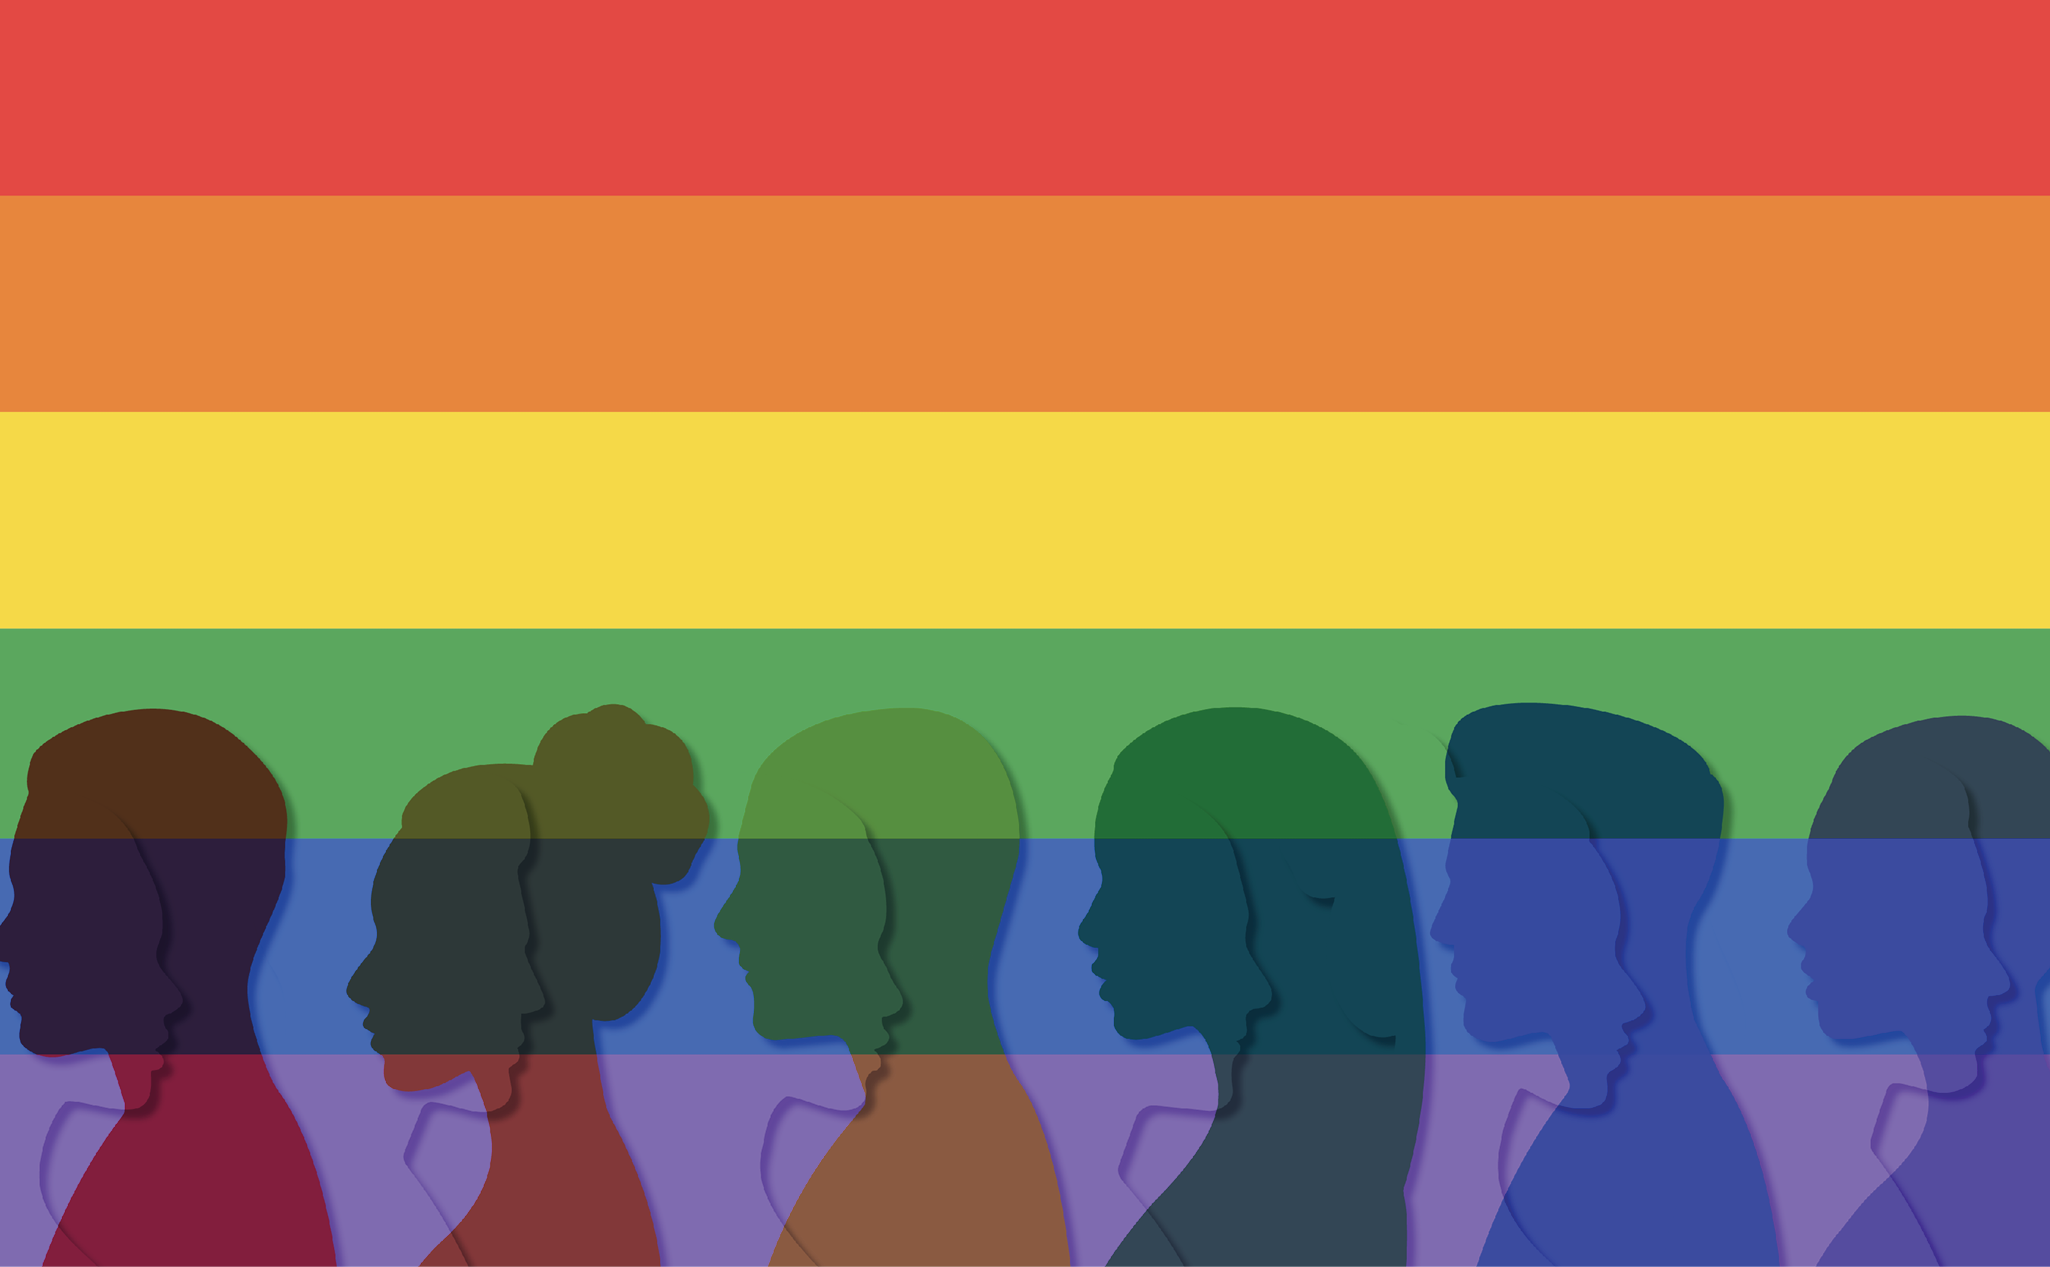 Silhouettes of various human profiles in different colors are overlaid on a rainbow-striped background.